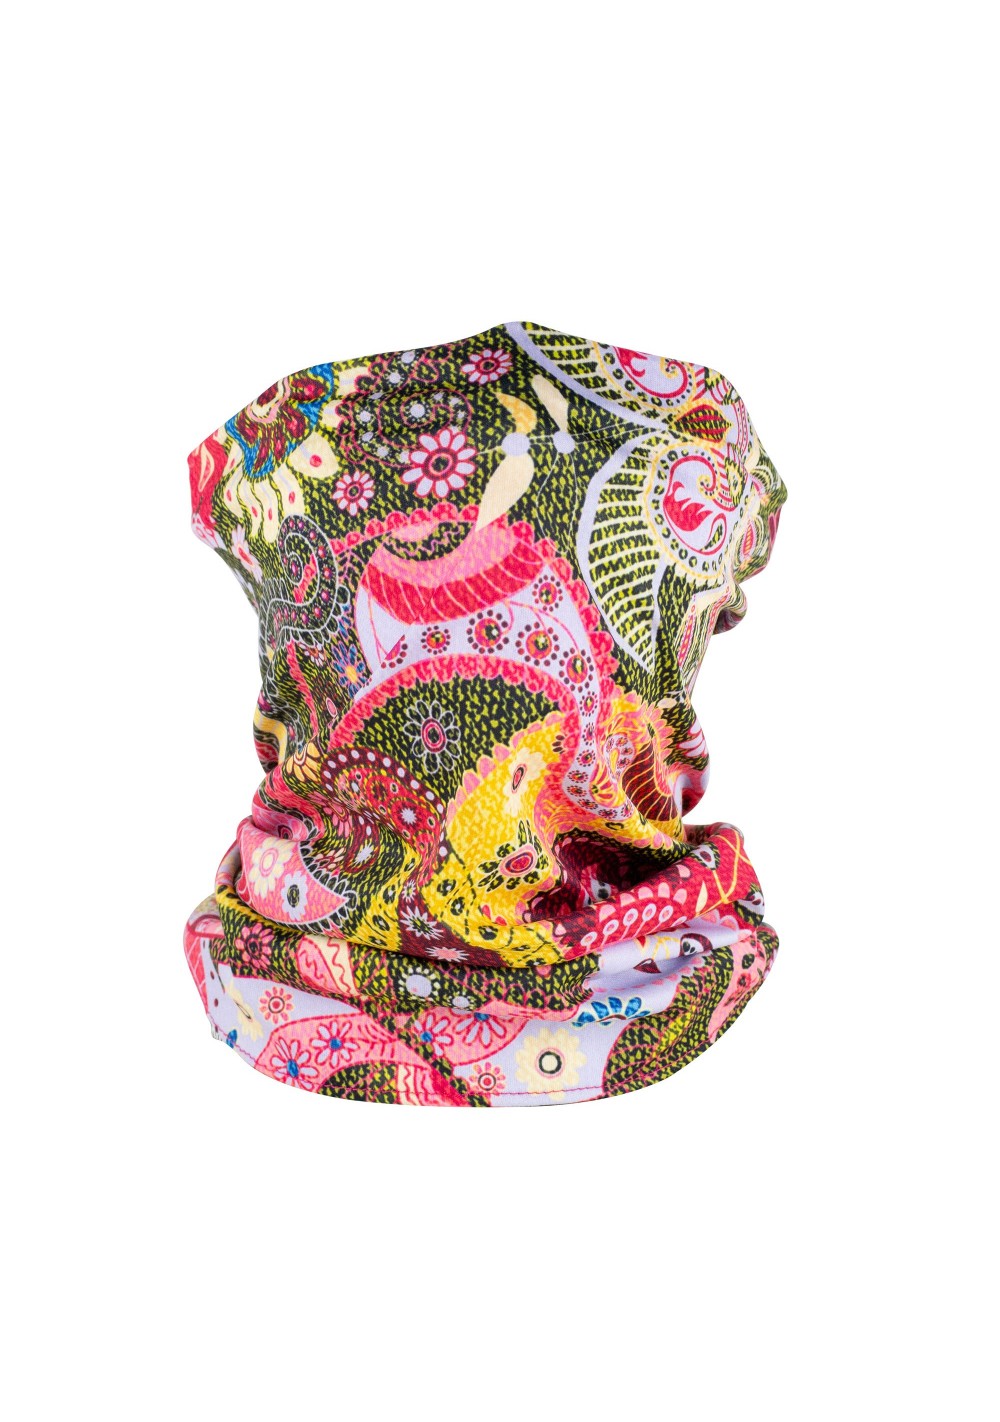 colorful pik and floral gaiter mask